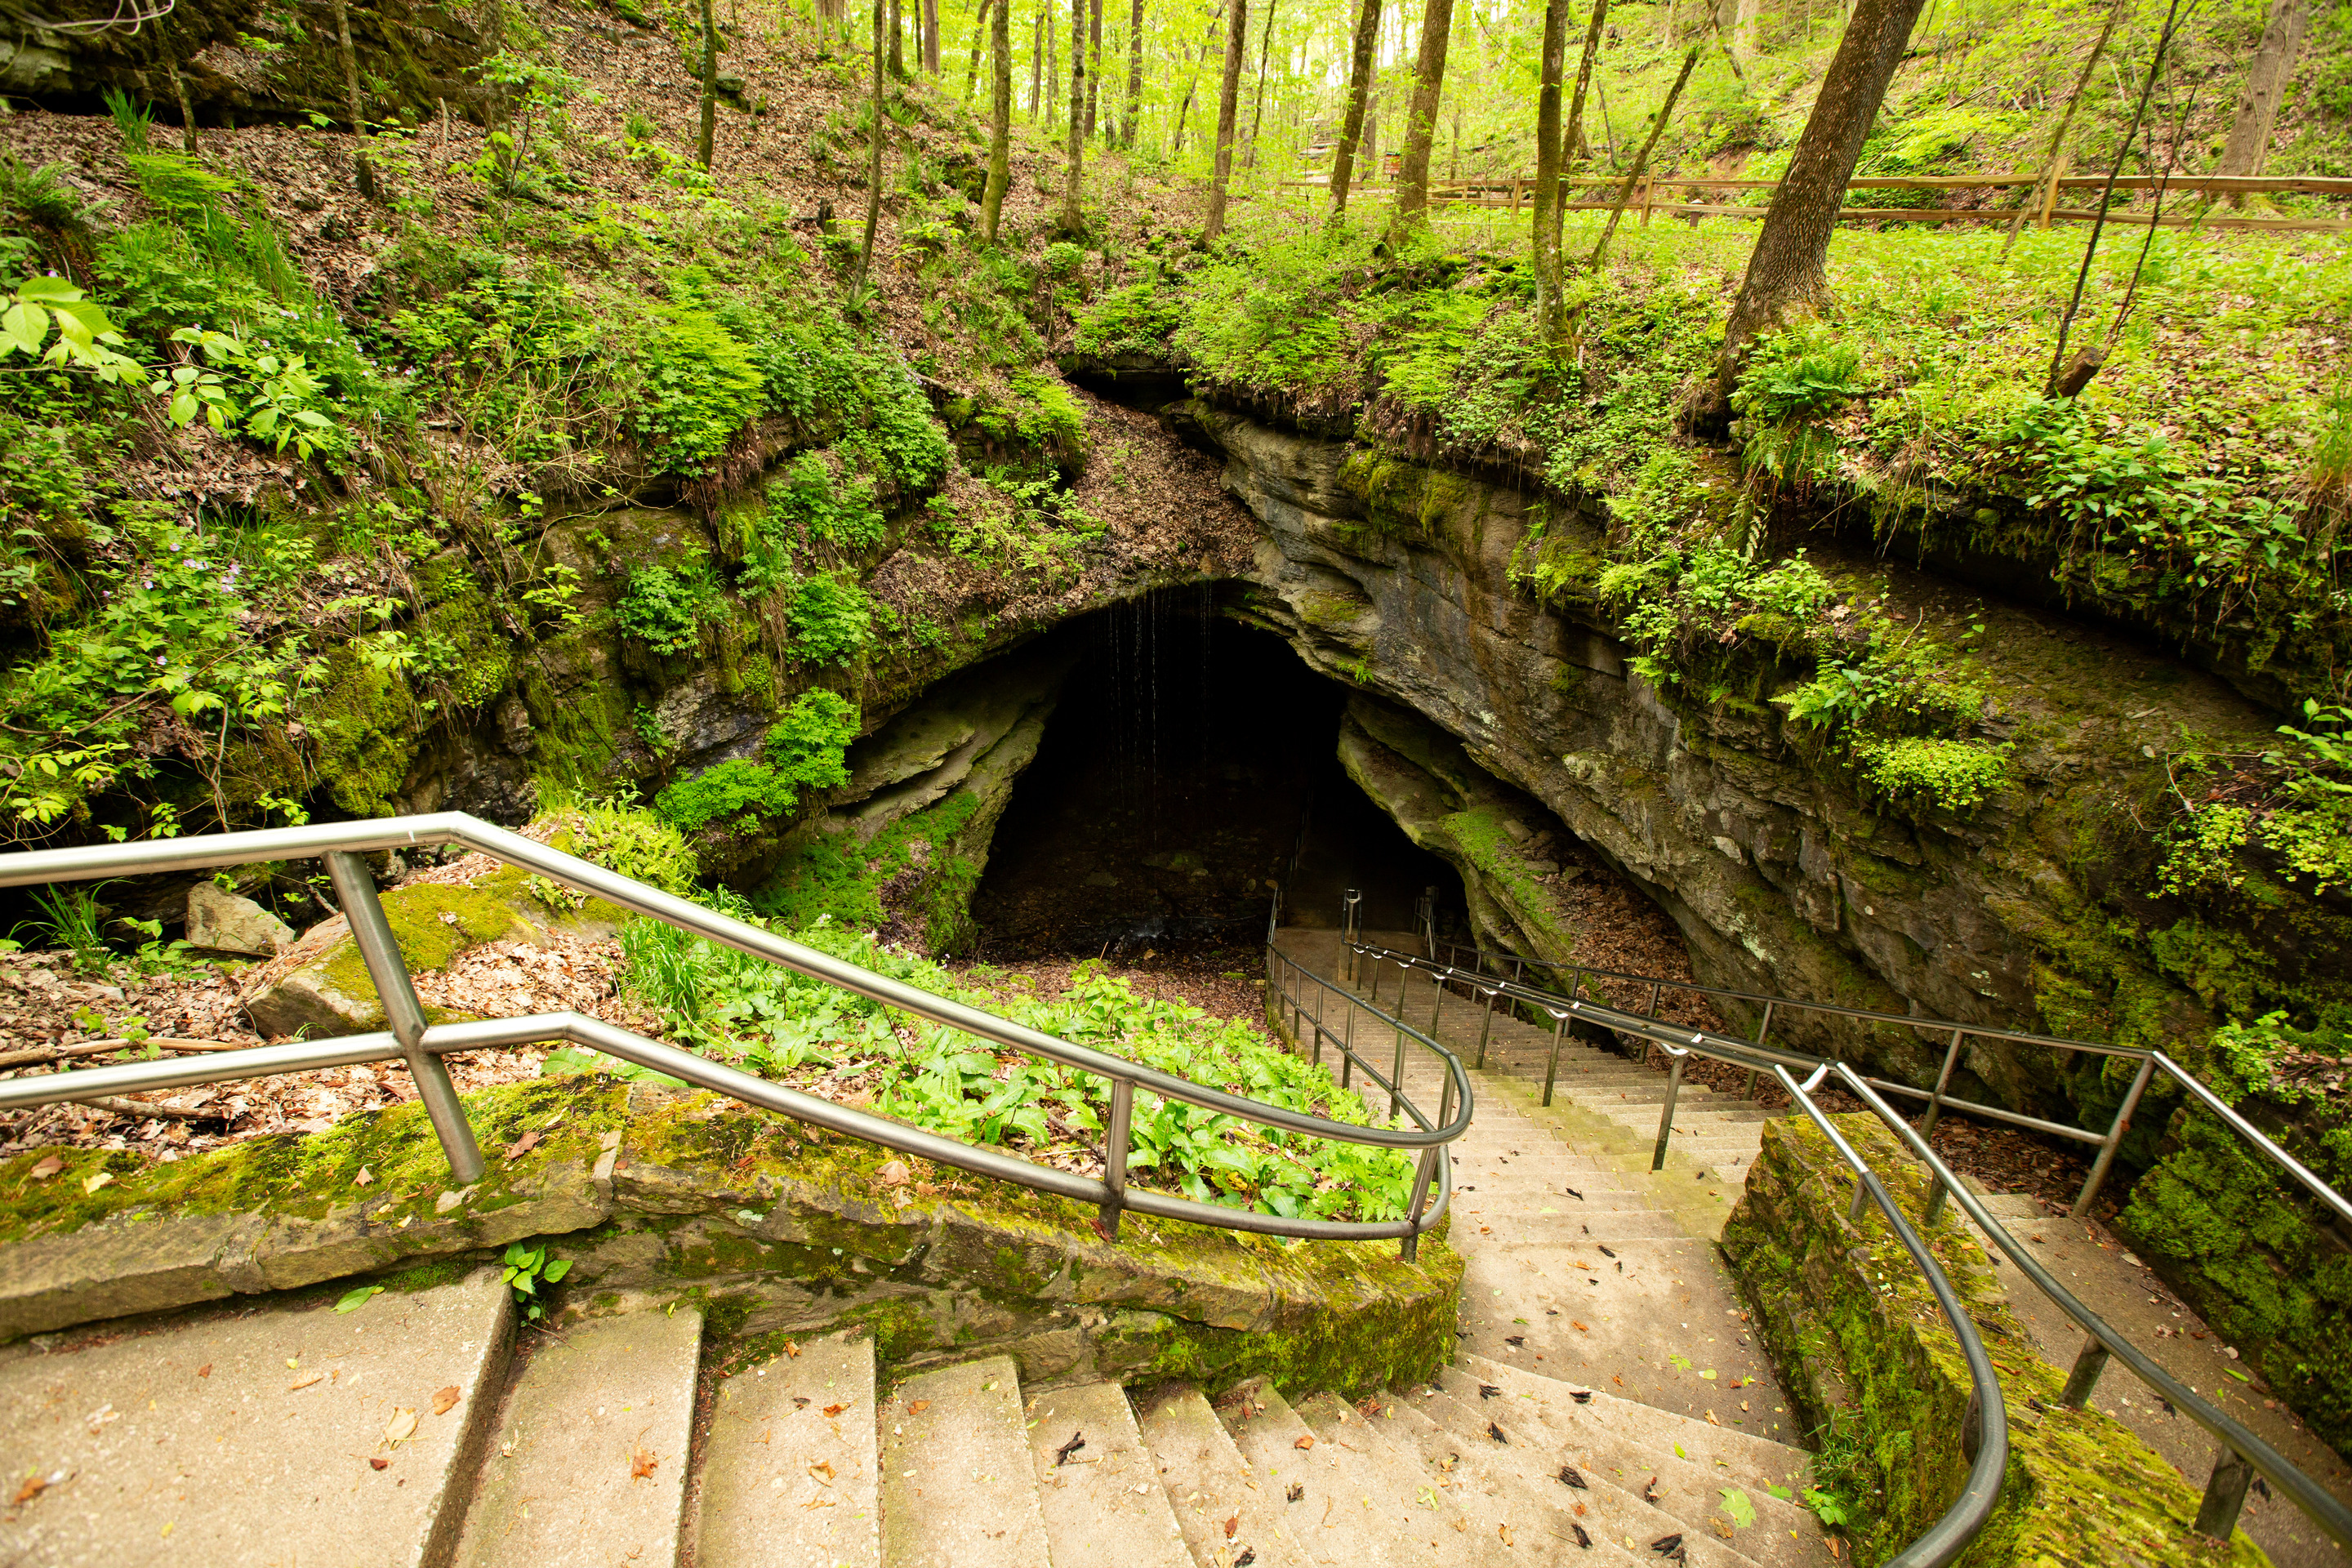 A long staircase leads into the entrance of a cave opening. 